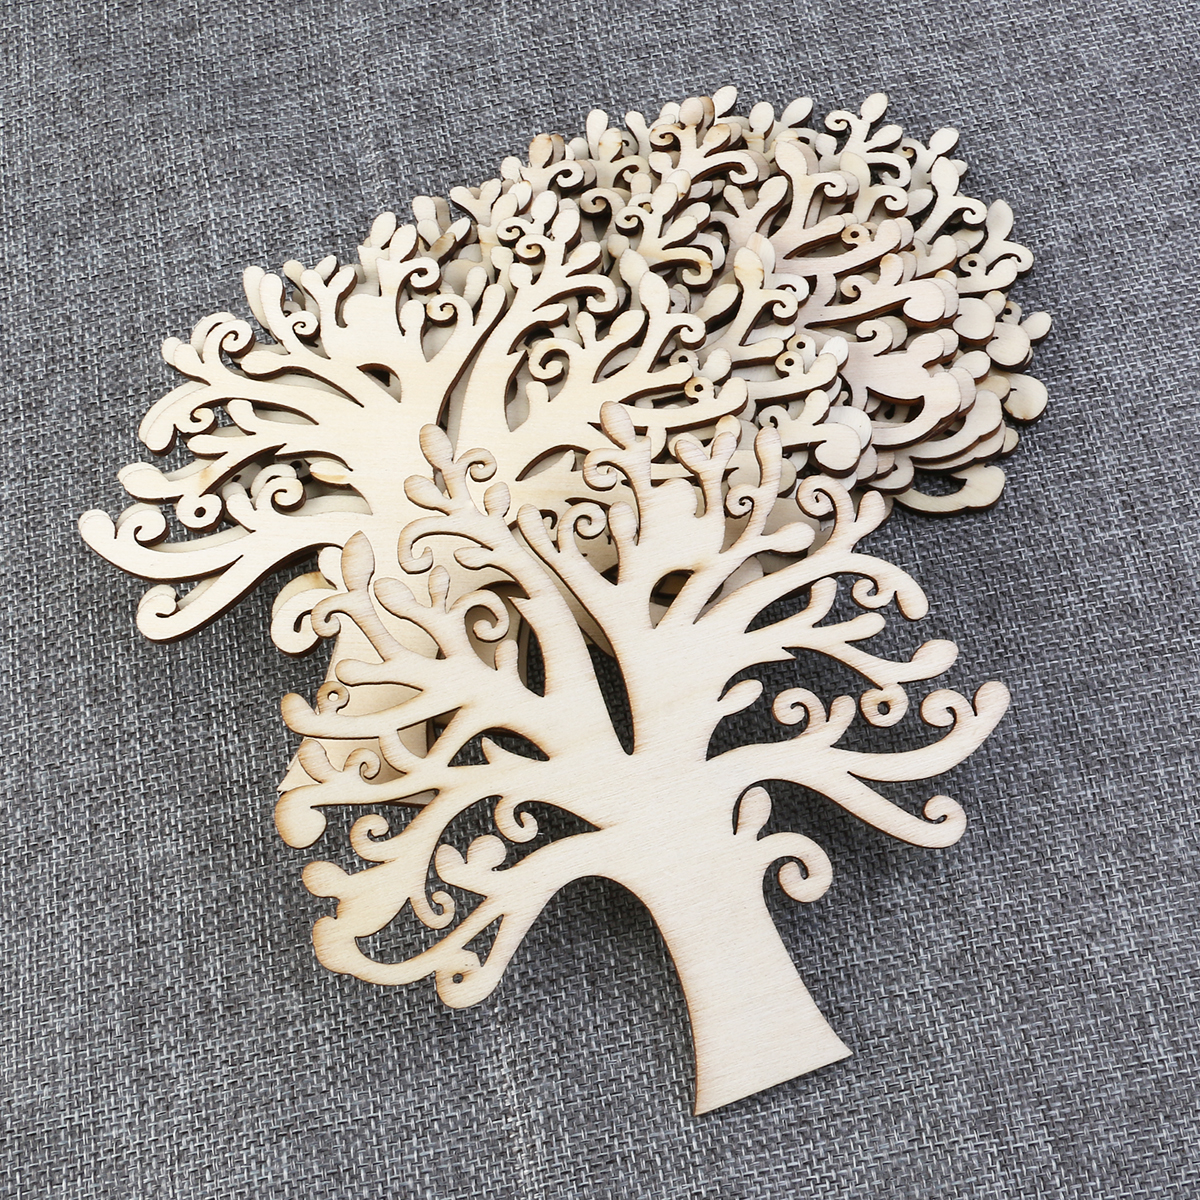 10pcs Blank Wooden Tree Embellishments for DIY Crafts DIY Festival Party Crafts Tree Shaped Wood Craft